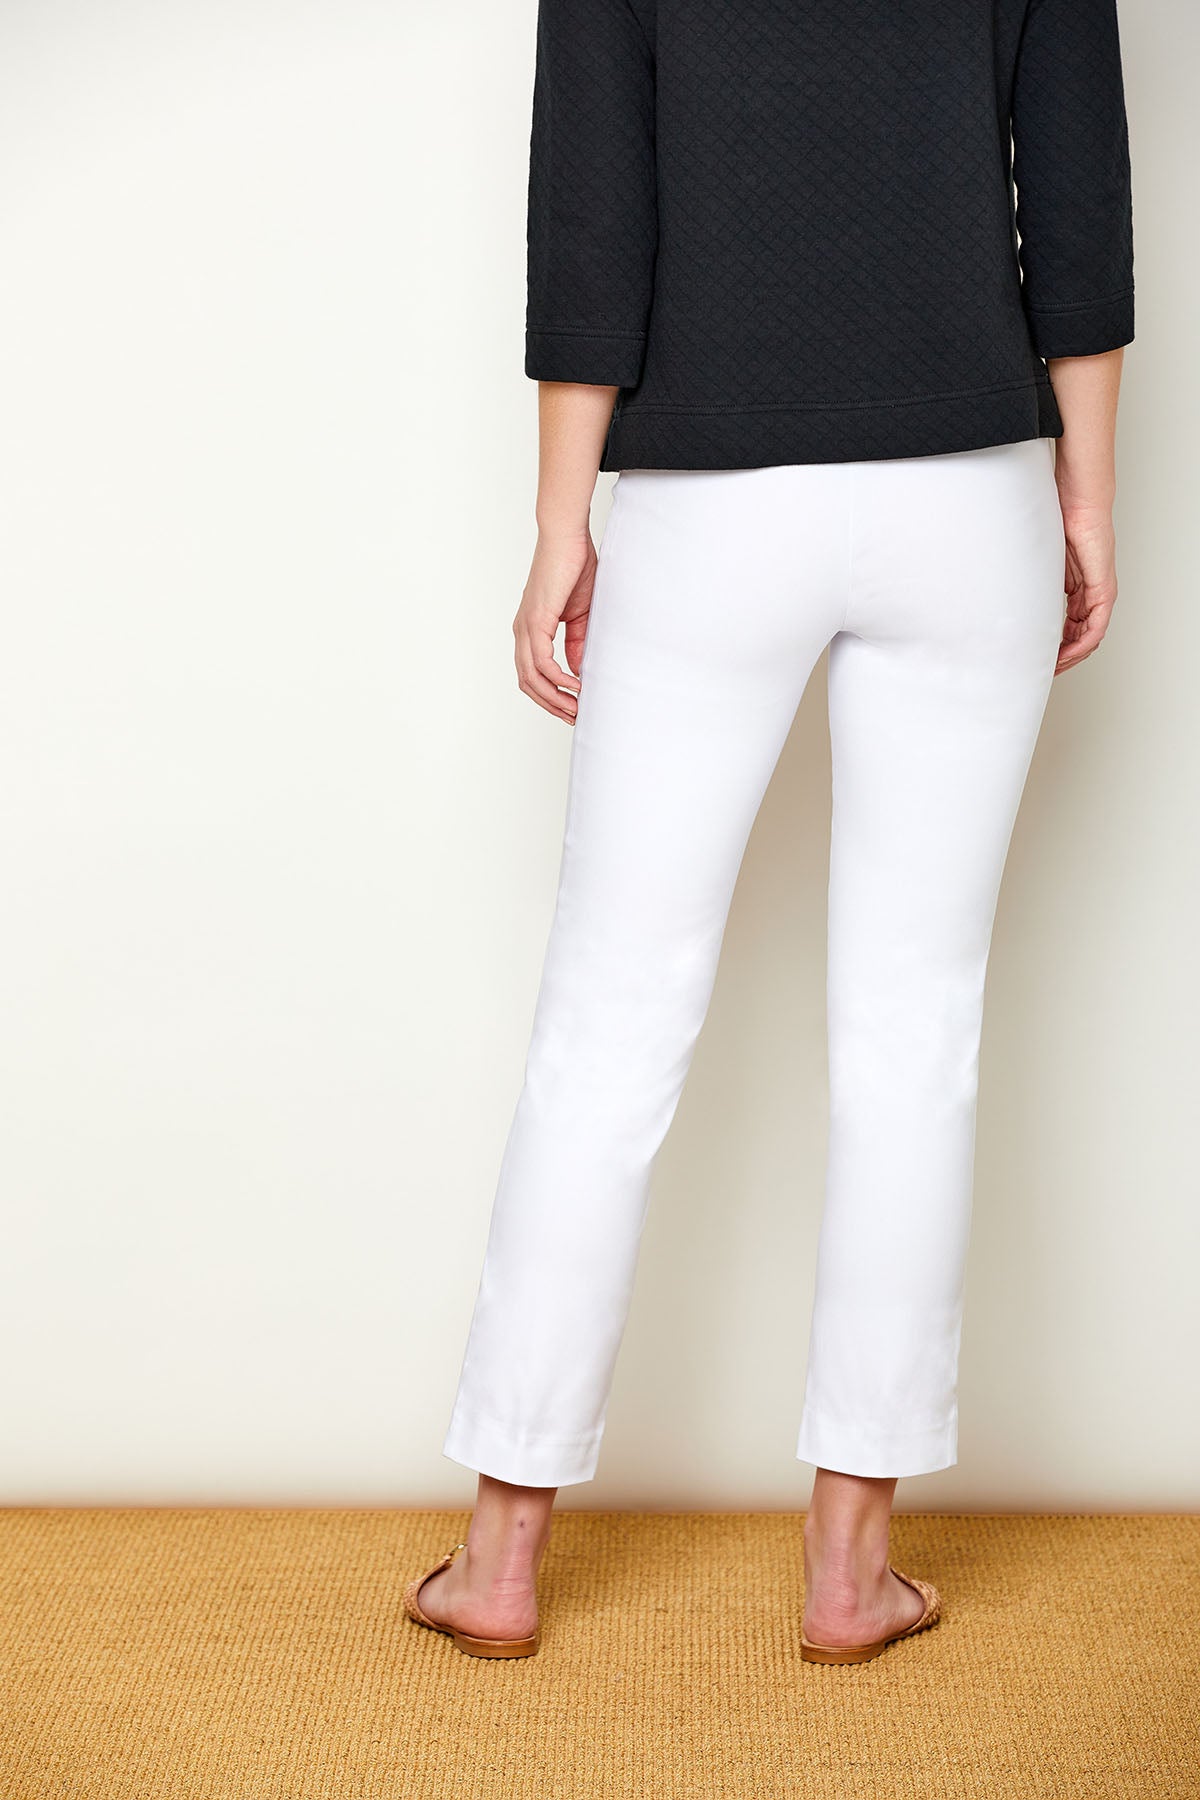 Woman in fitted white pants